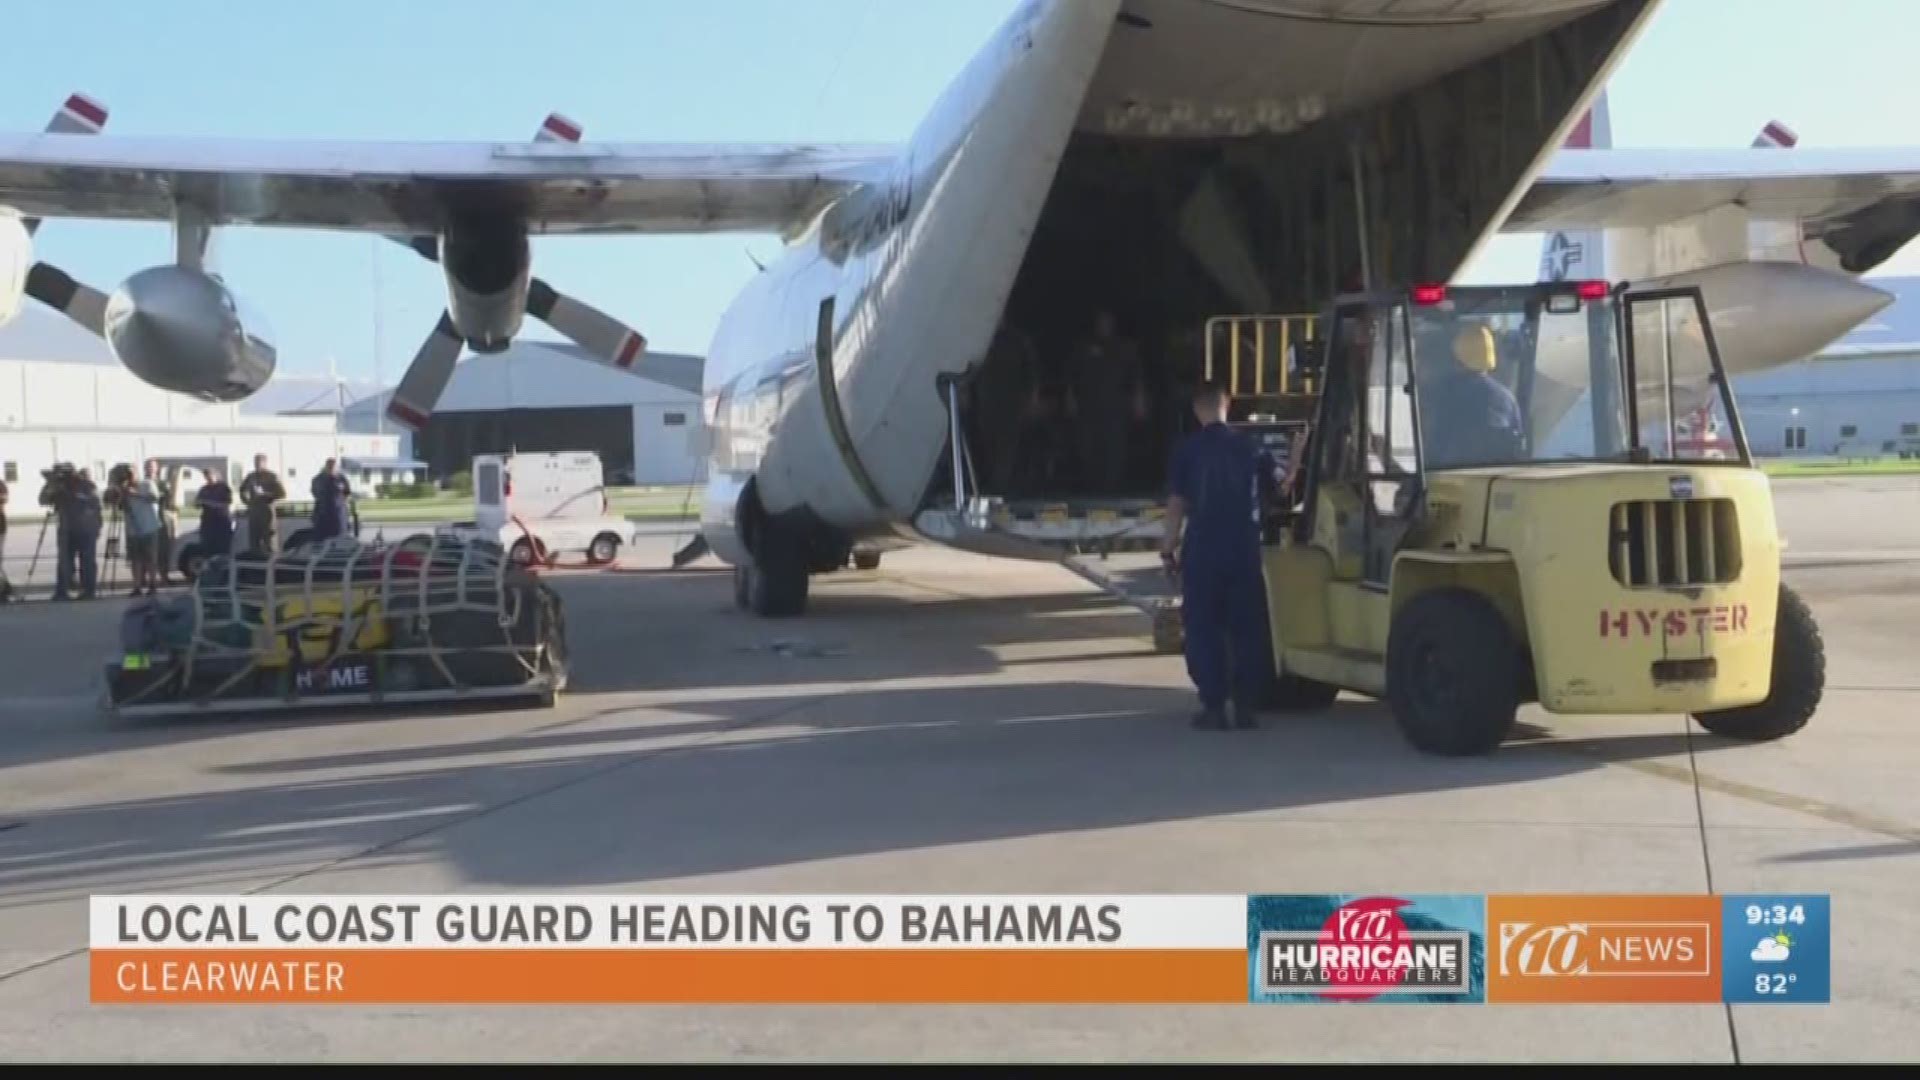 Members of the U.S. Coast Guard based in Clearwater are headed to the Bahamas.